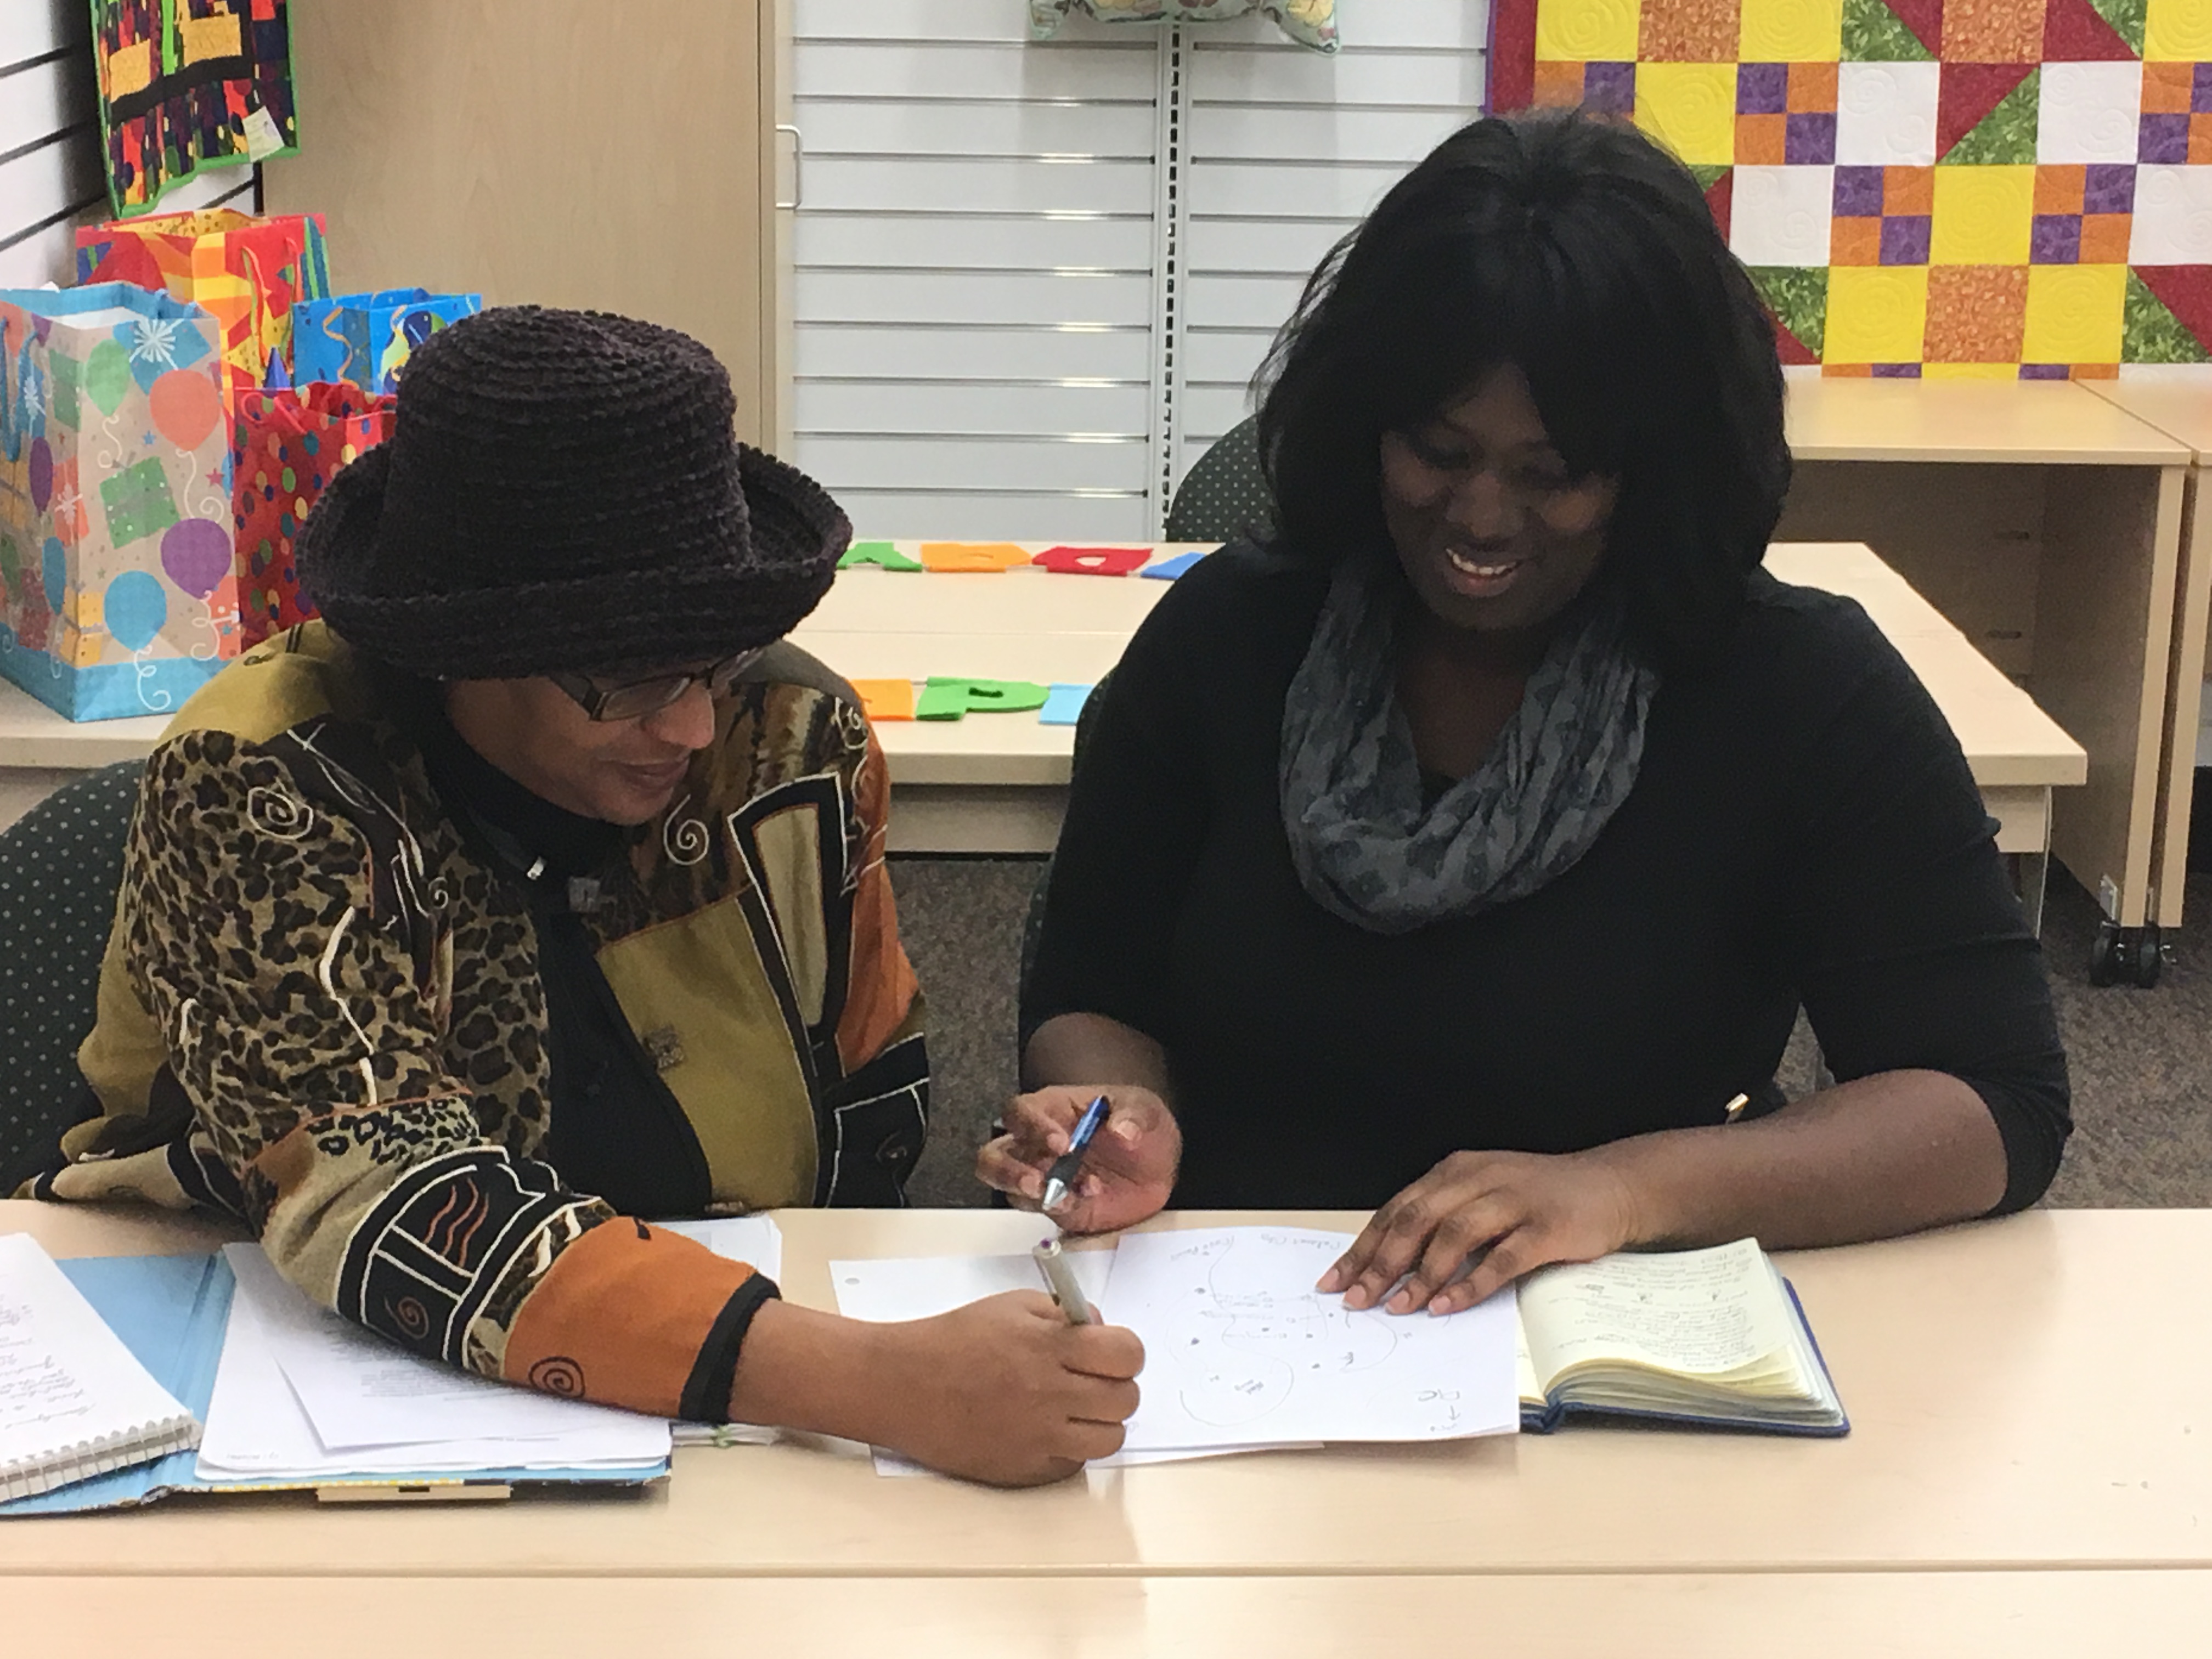 Kamita Gray and Akua Asa-awuku collaborate on a Thriving Earth Exchange project in Brandywine, MD.